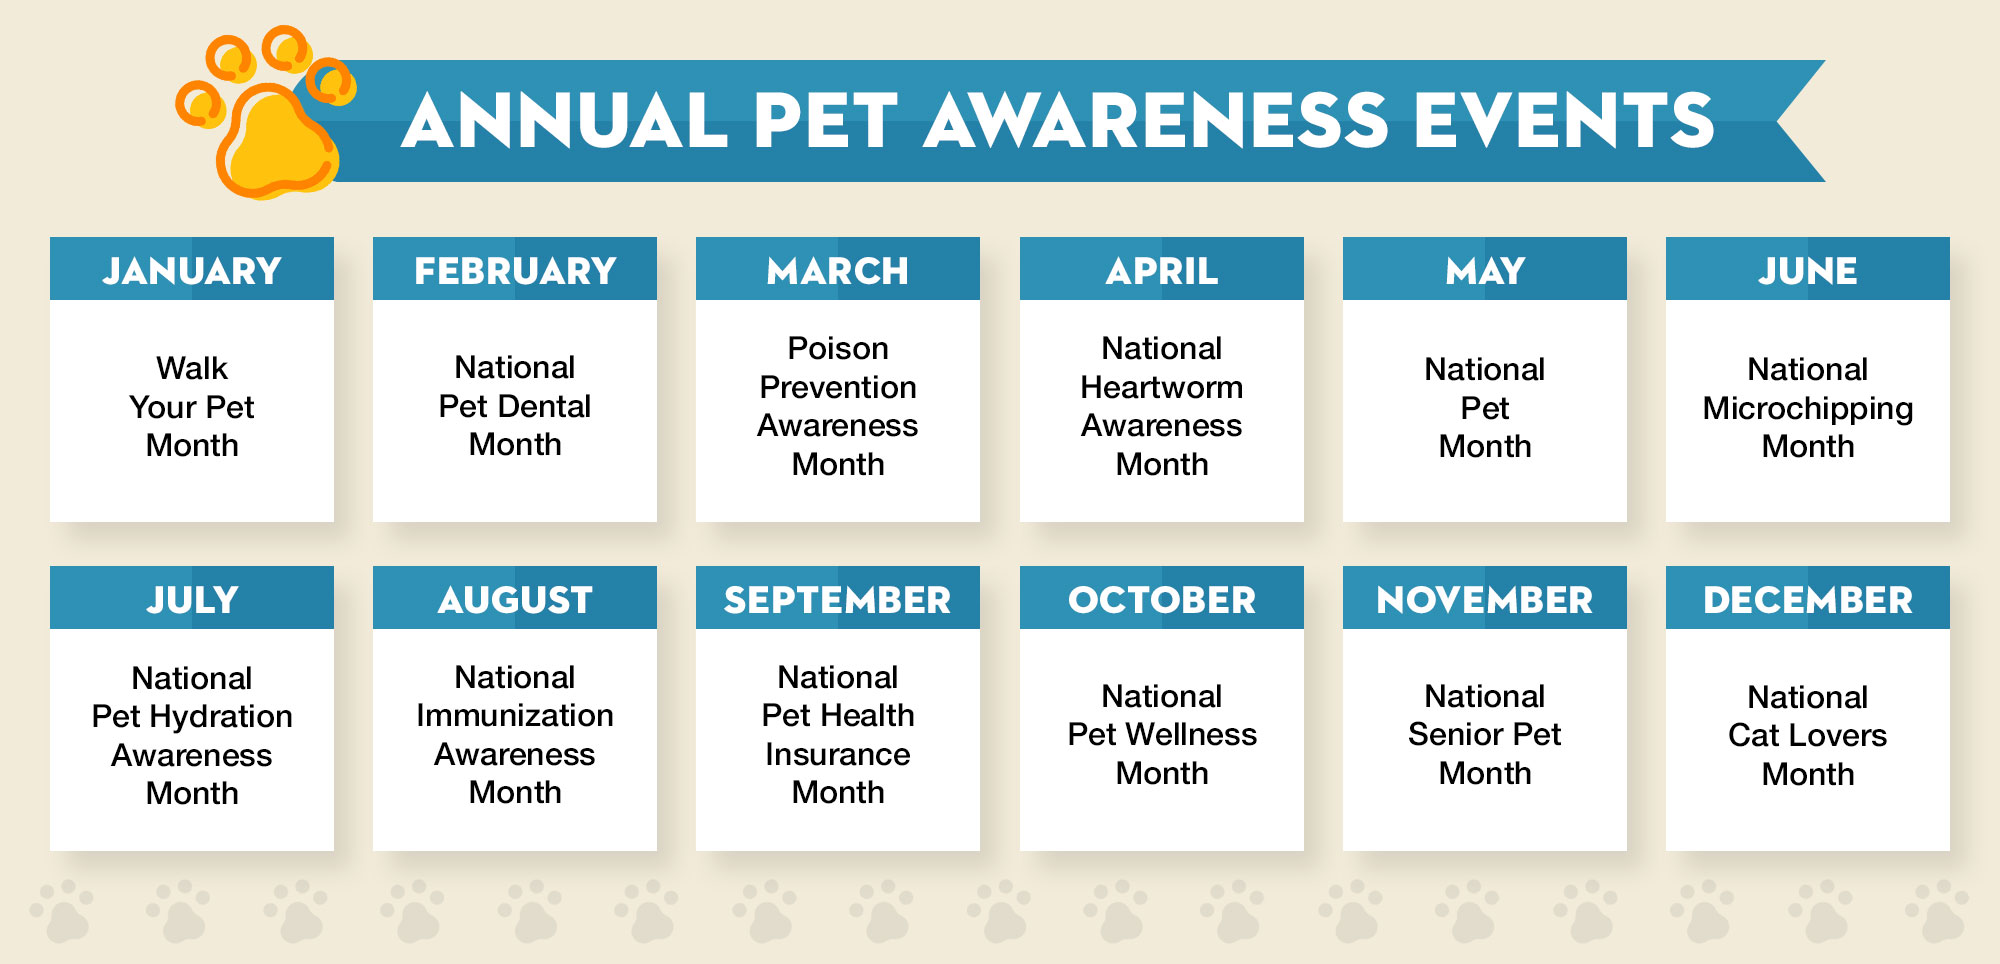 National Pet Events